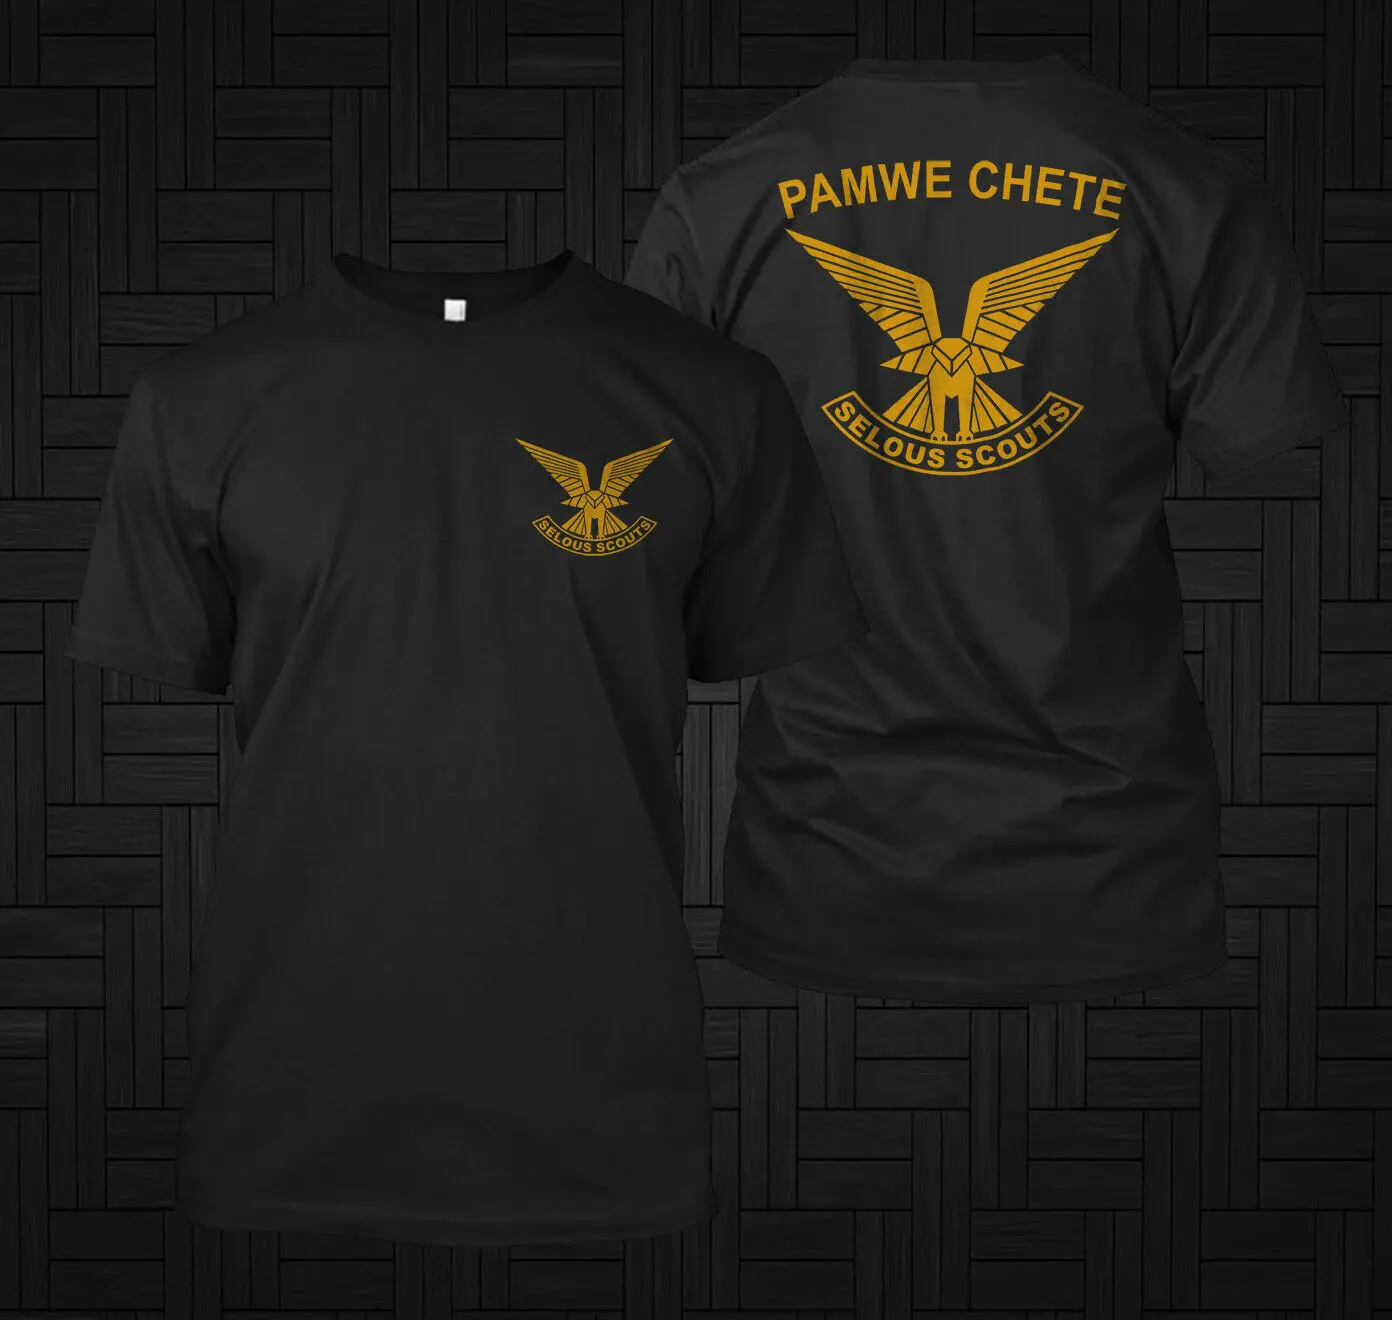 

Rhodesian Zimbabwe Army Special Forces Pamwe Chete Selous Scouts T-Shirt. Summer Cotton Short Sleeve O-Neck Mens T Shirt New